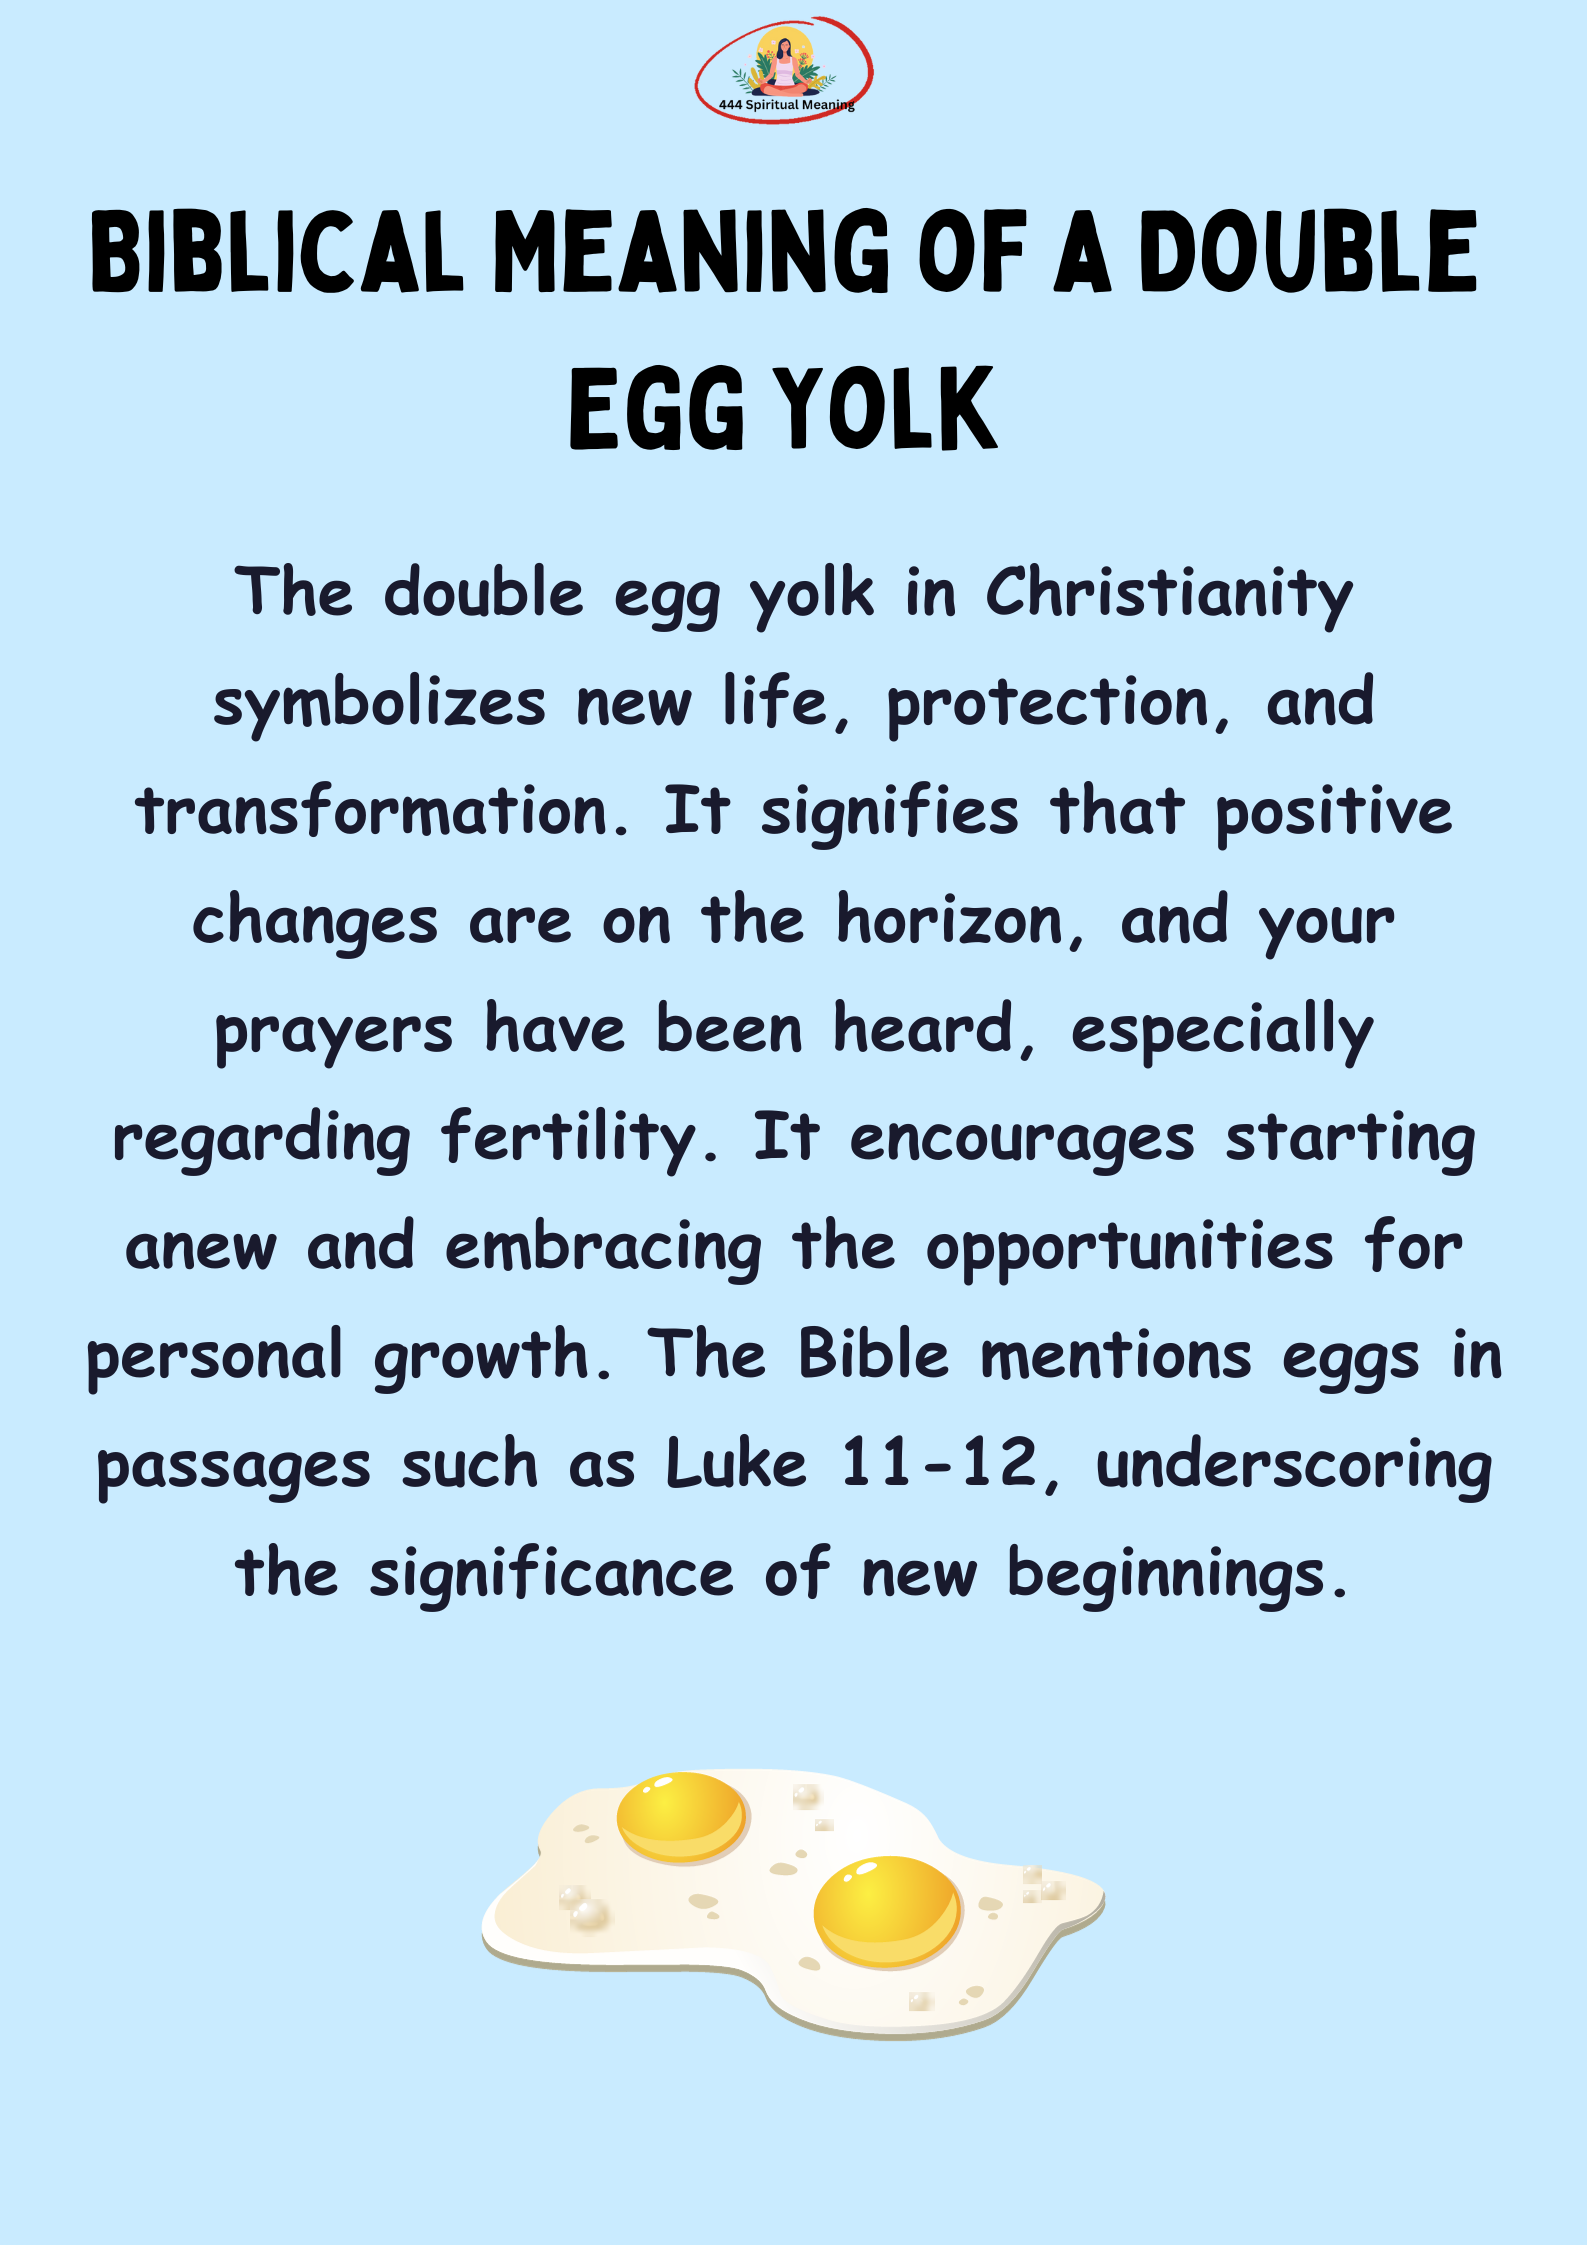 Biblical Meaning of a Double Egg Yolk